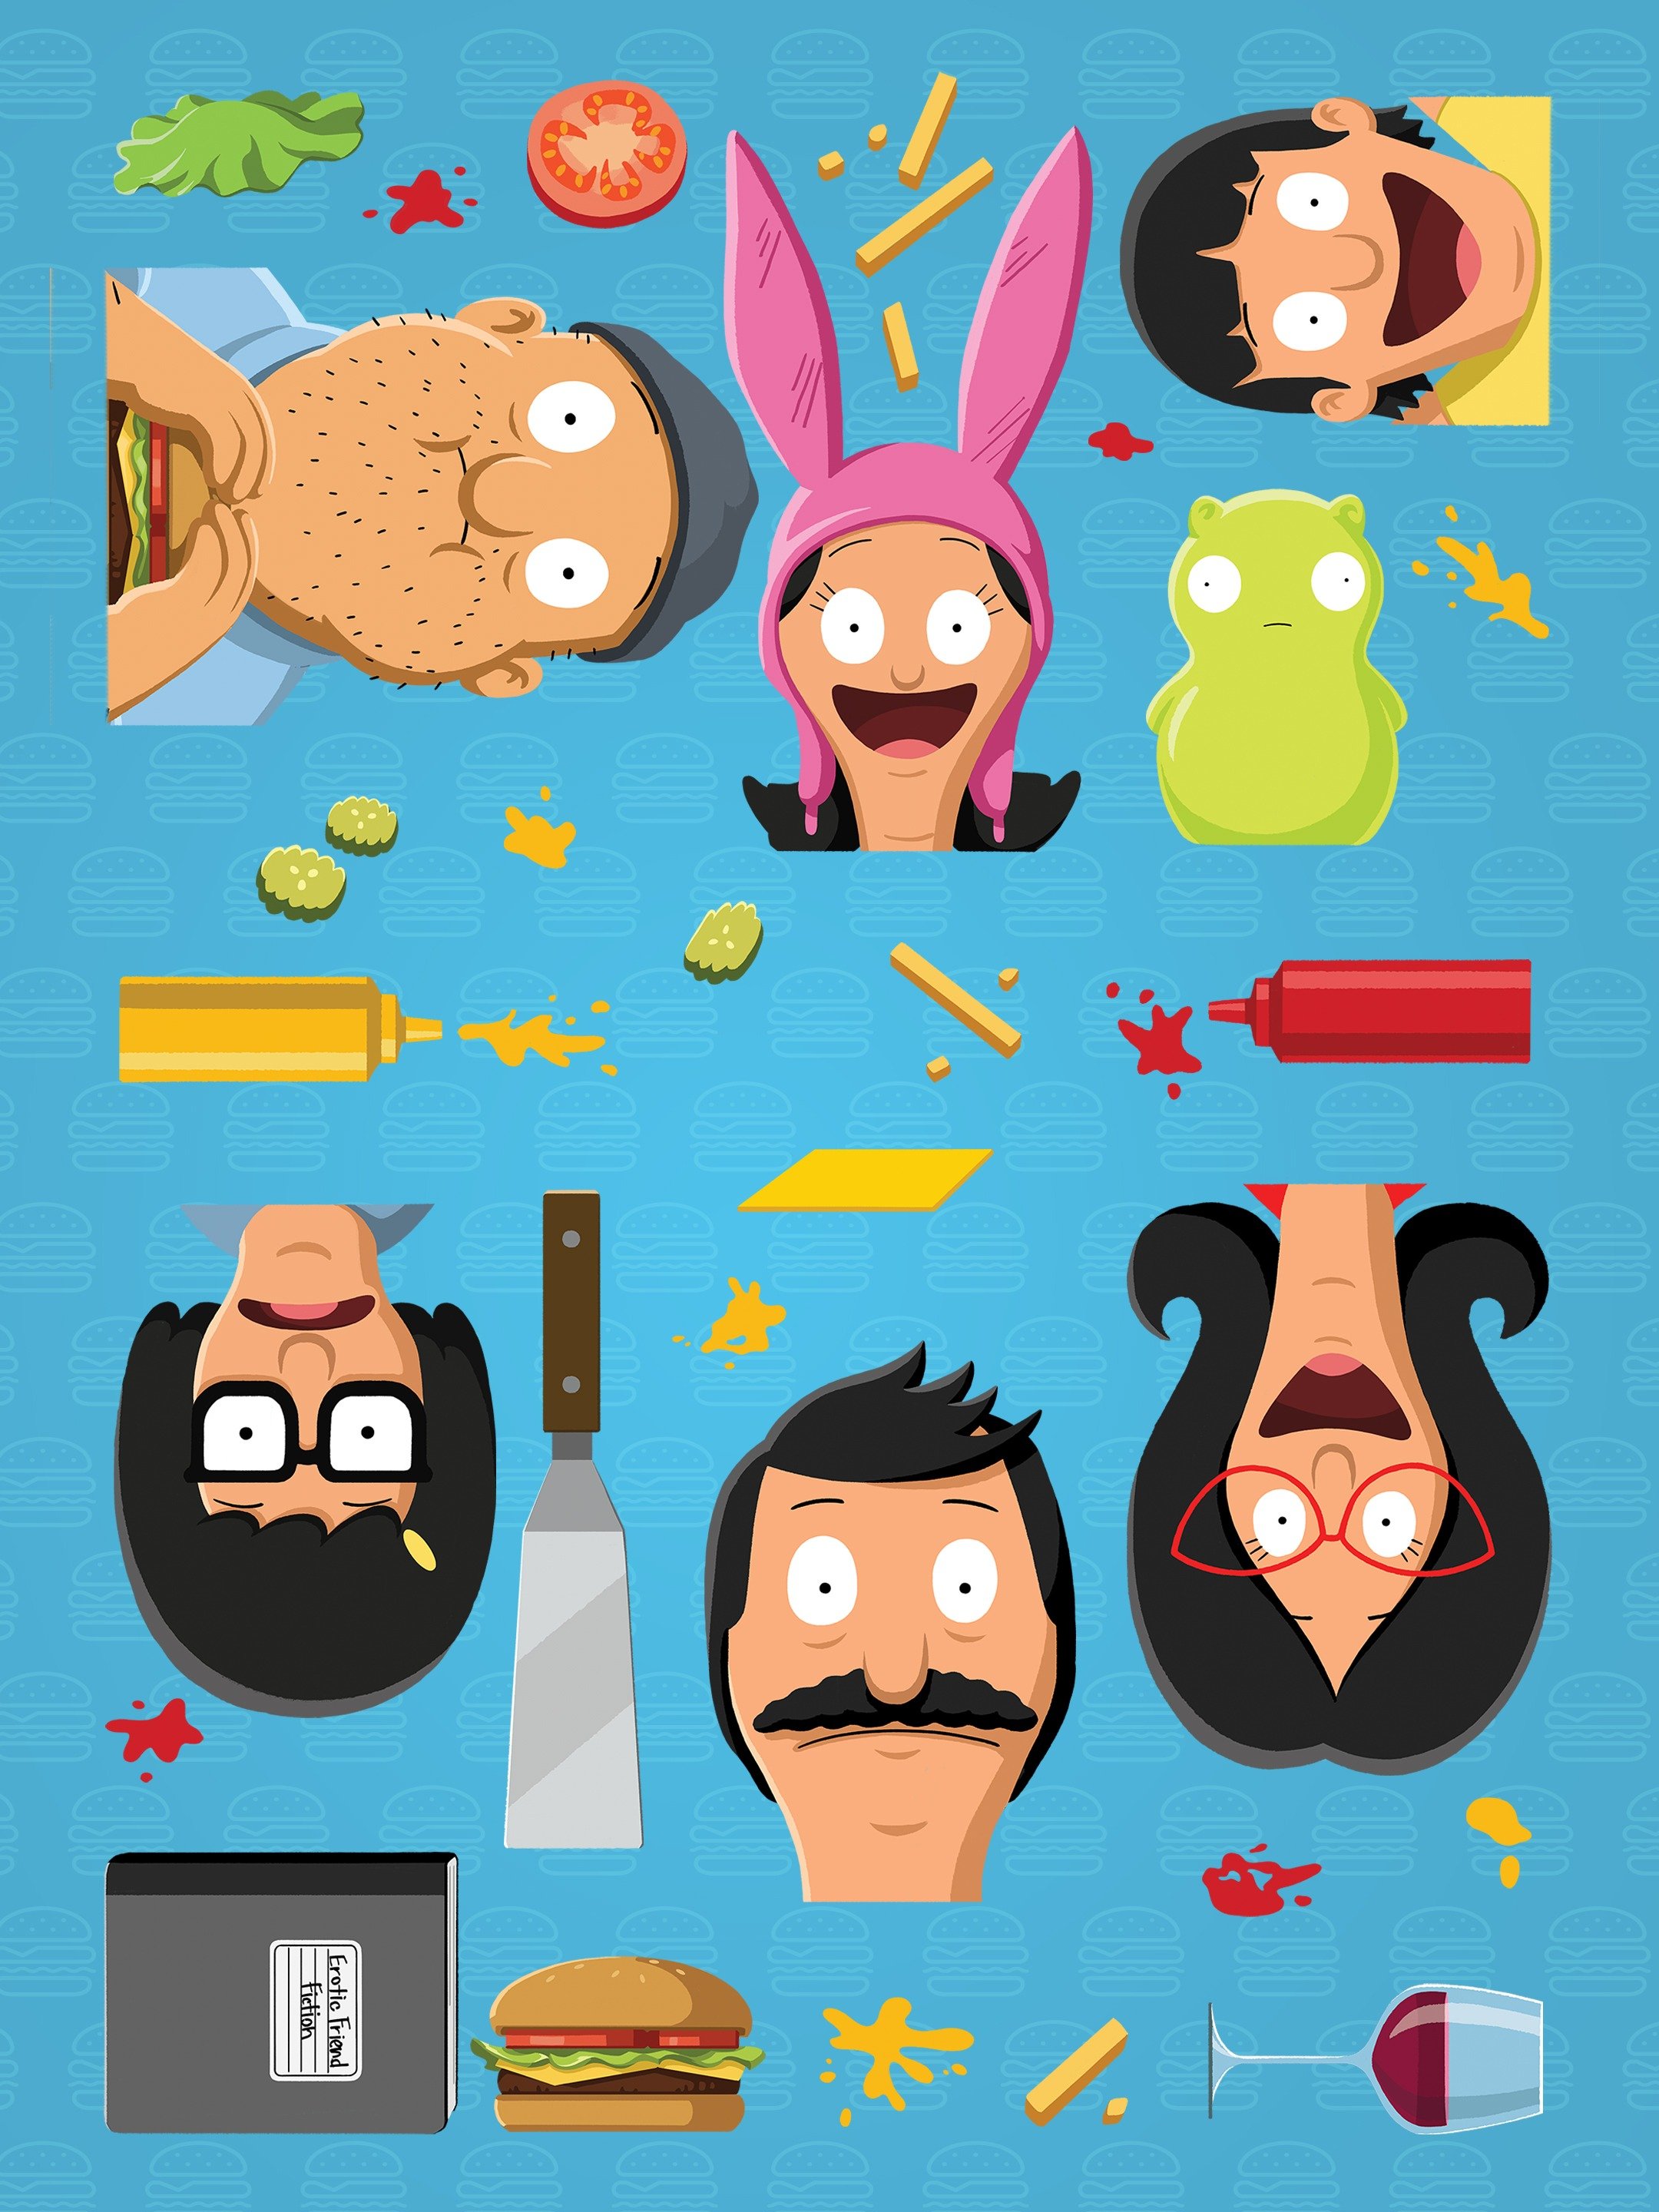 Bobs Burgers Vol 1 Wallpapers by Iconfactory on Dribbble